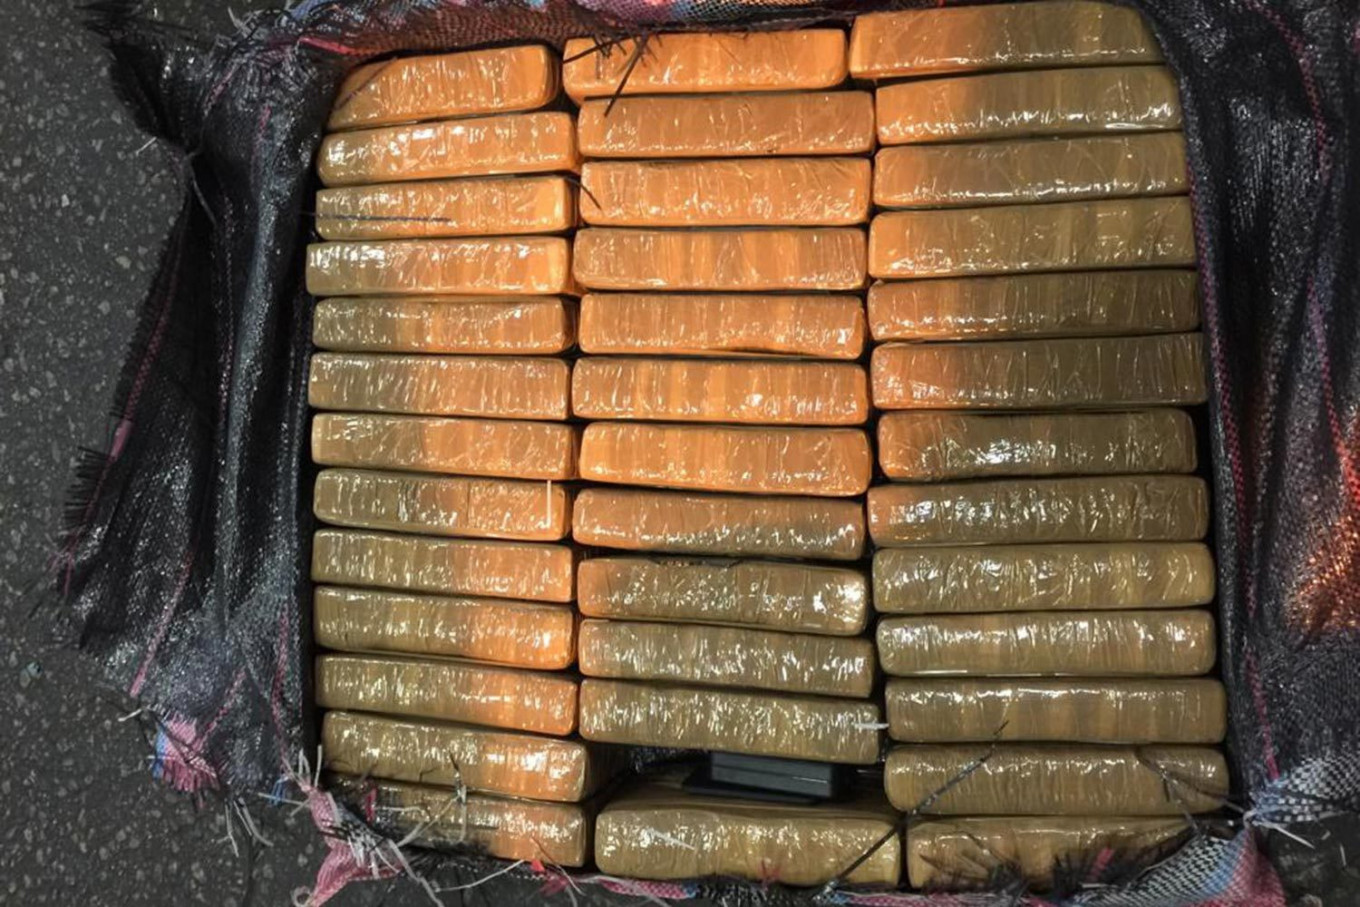 $70M Worth of Cocaine Seized at Russian Port